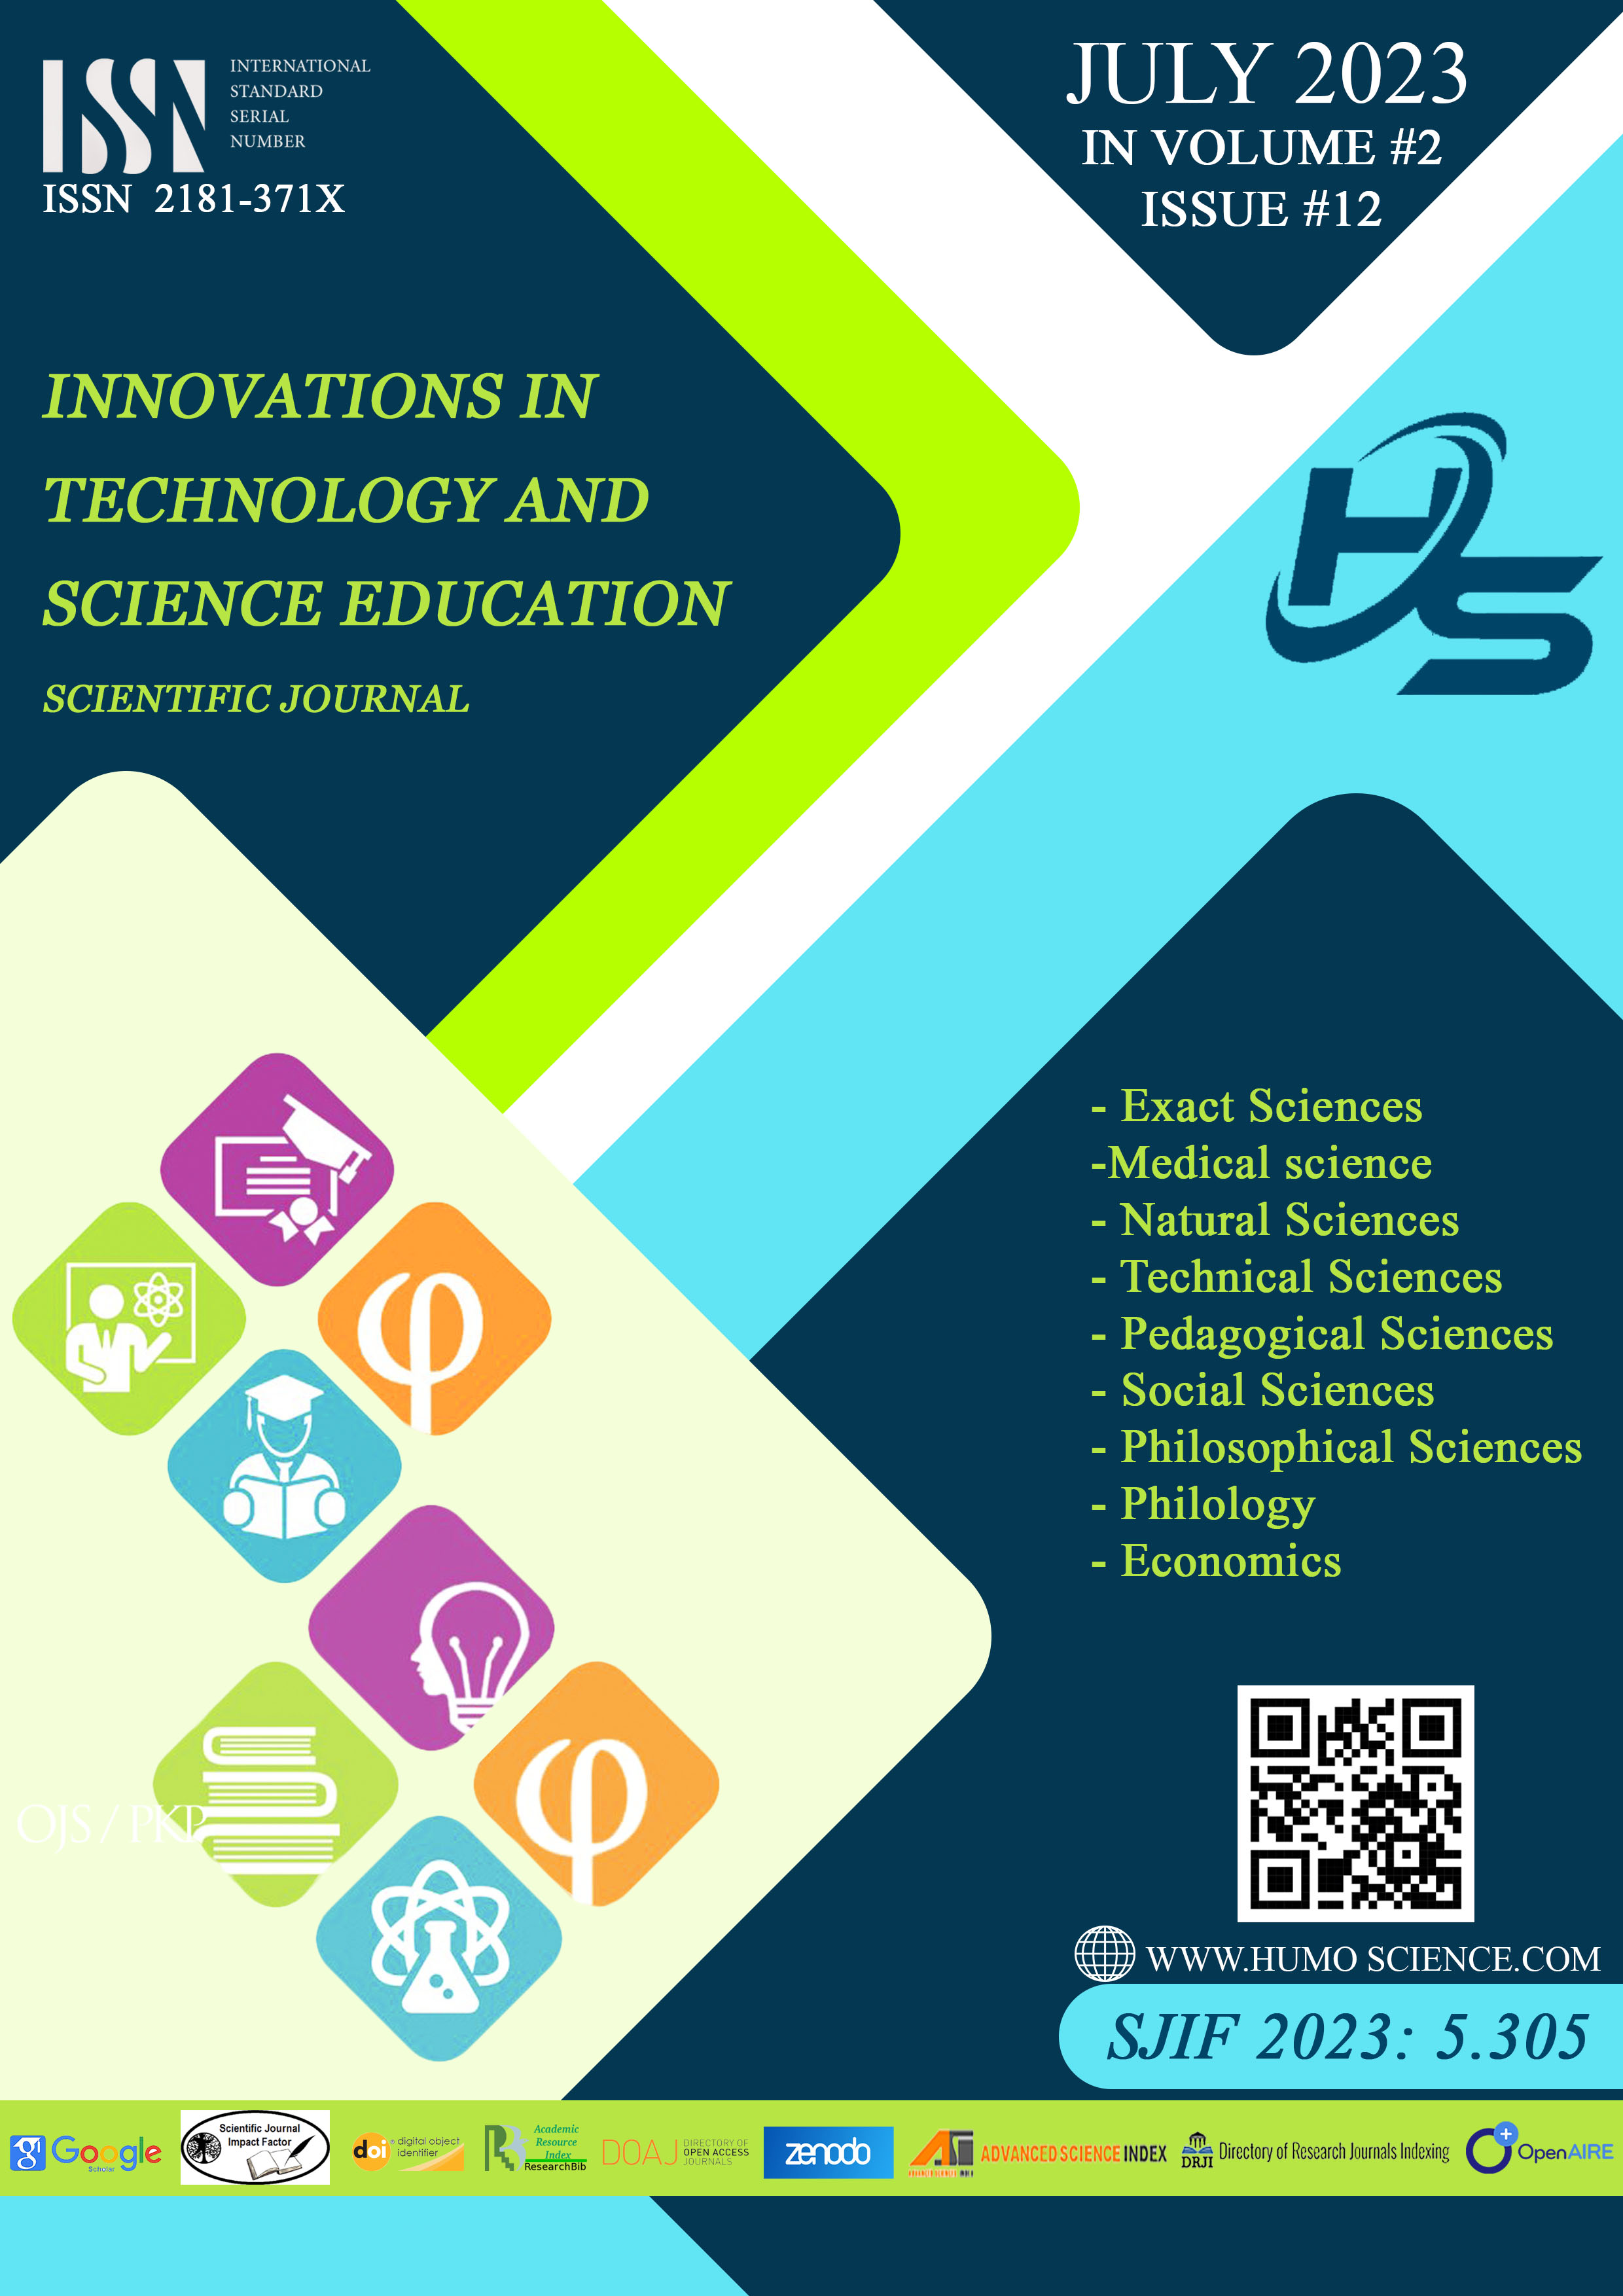 					View Vol. 2 No. 12 (2023): Innovationsa in Technology and Science Education
				